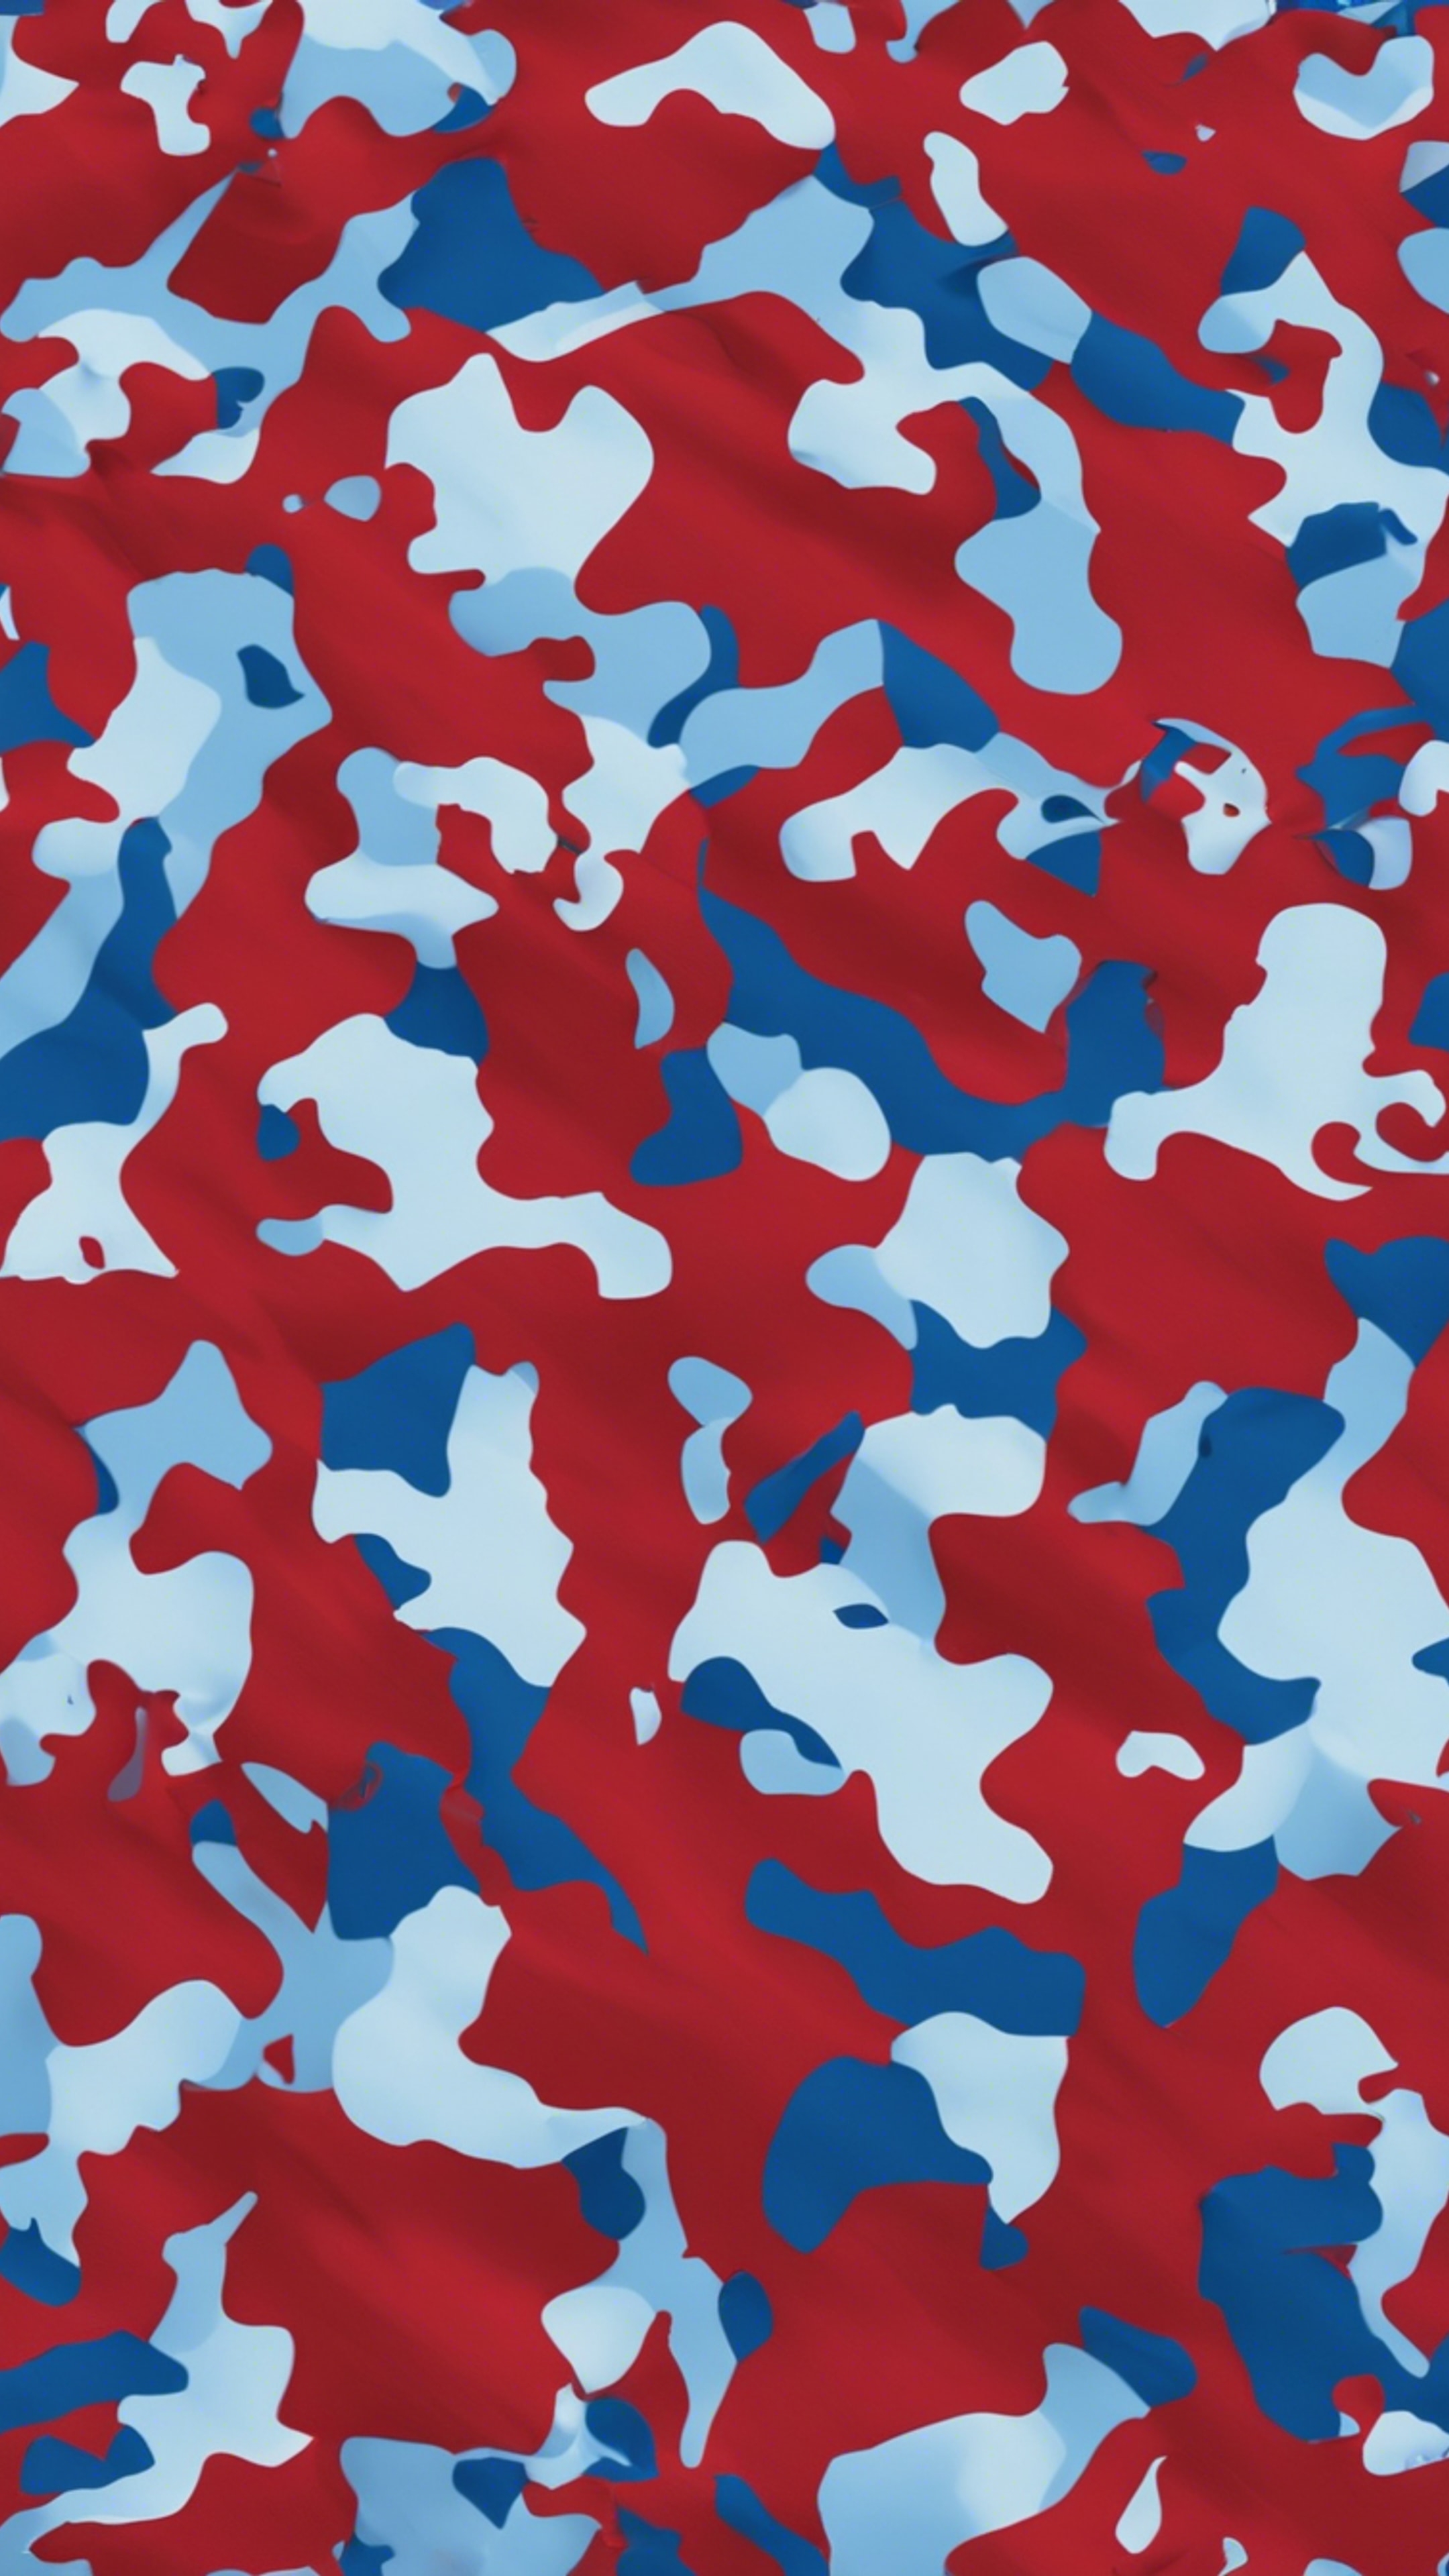 A seamles pattern of red and blue camouflage. Tapeta[edd7b72010f24e93b1c5]